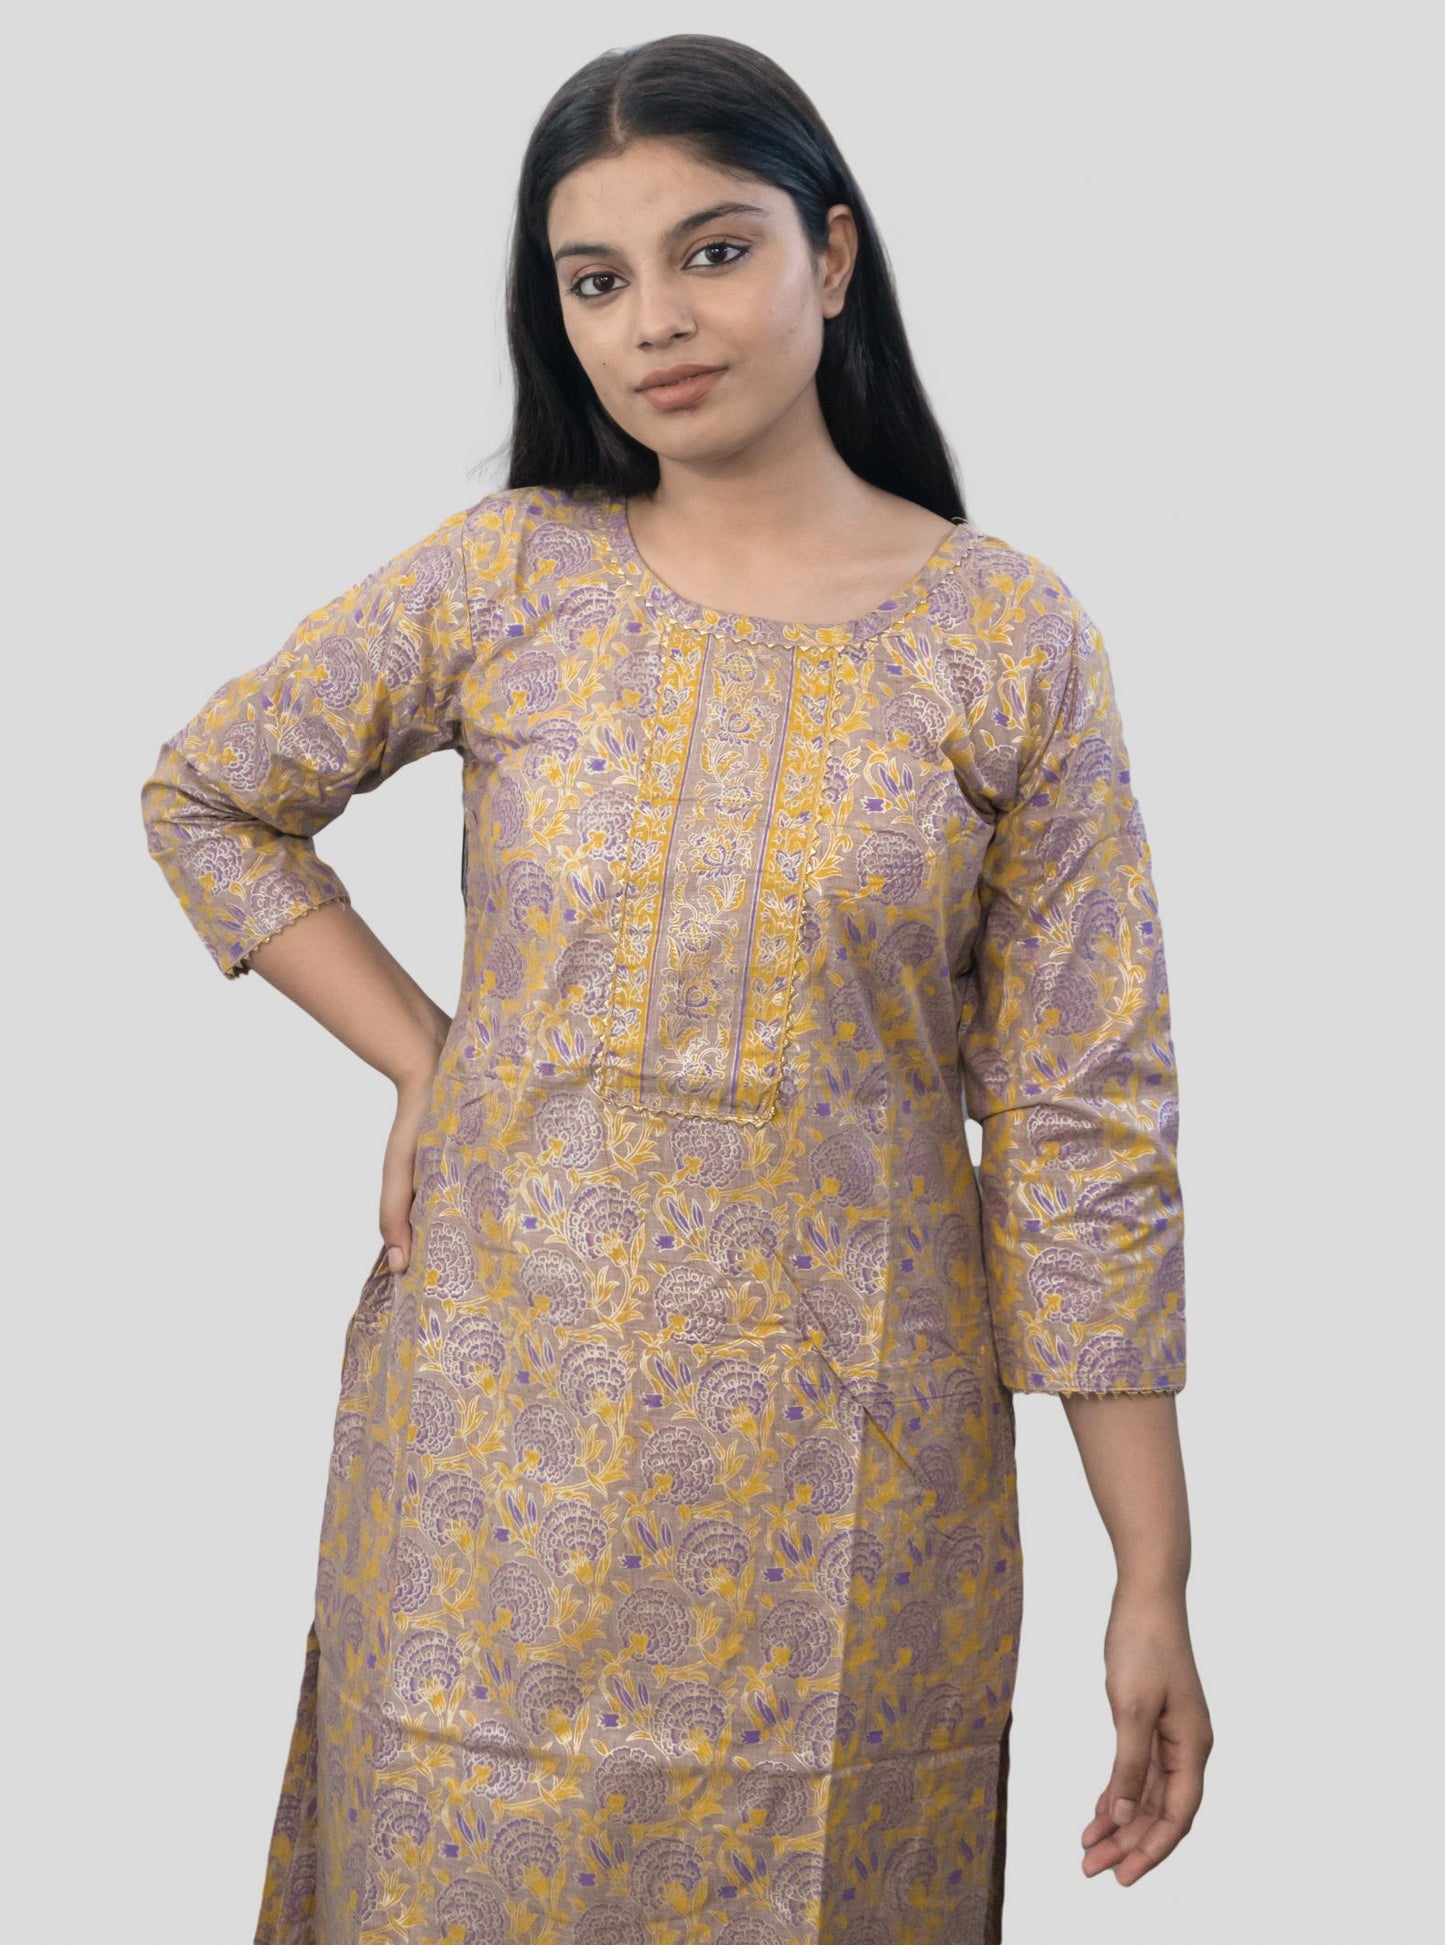 ANIKRRITI The Cotton Casual Suit"